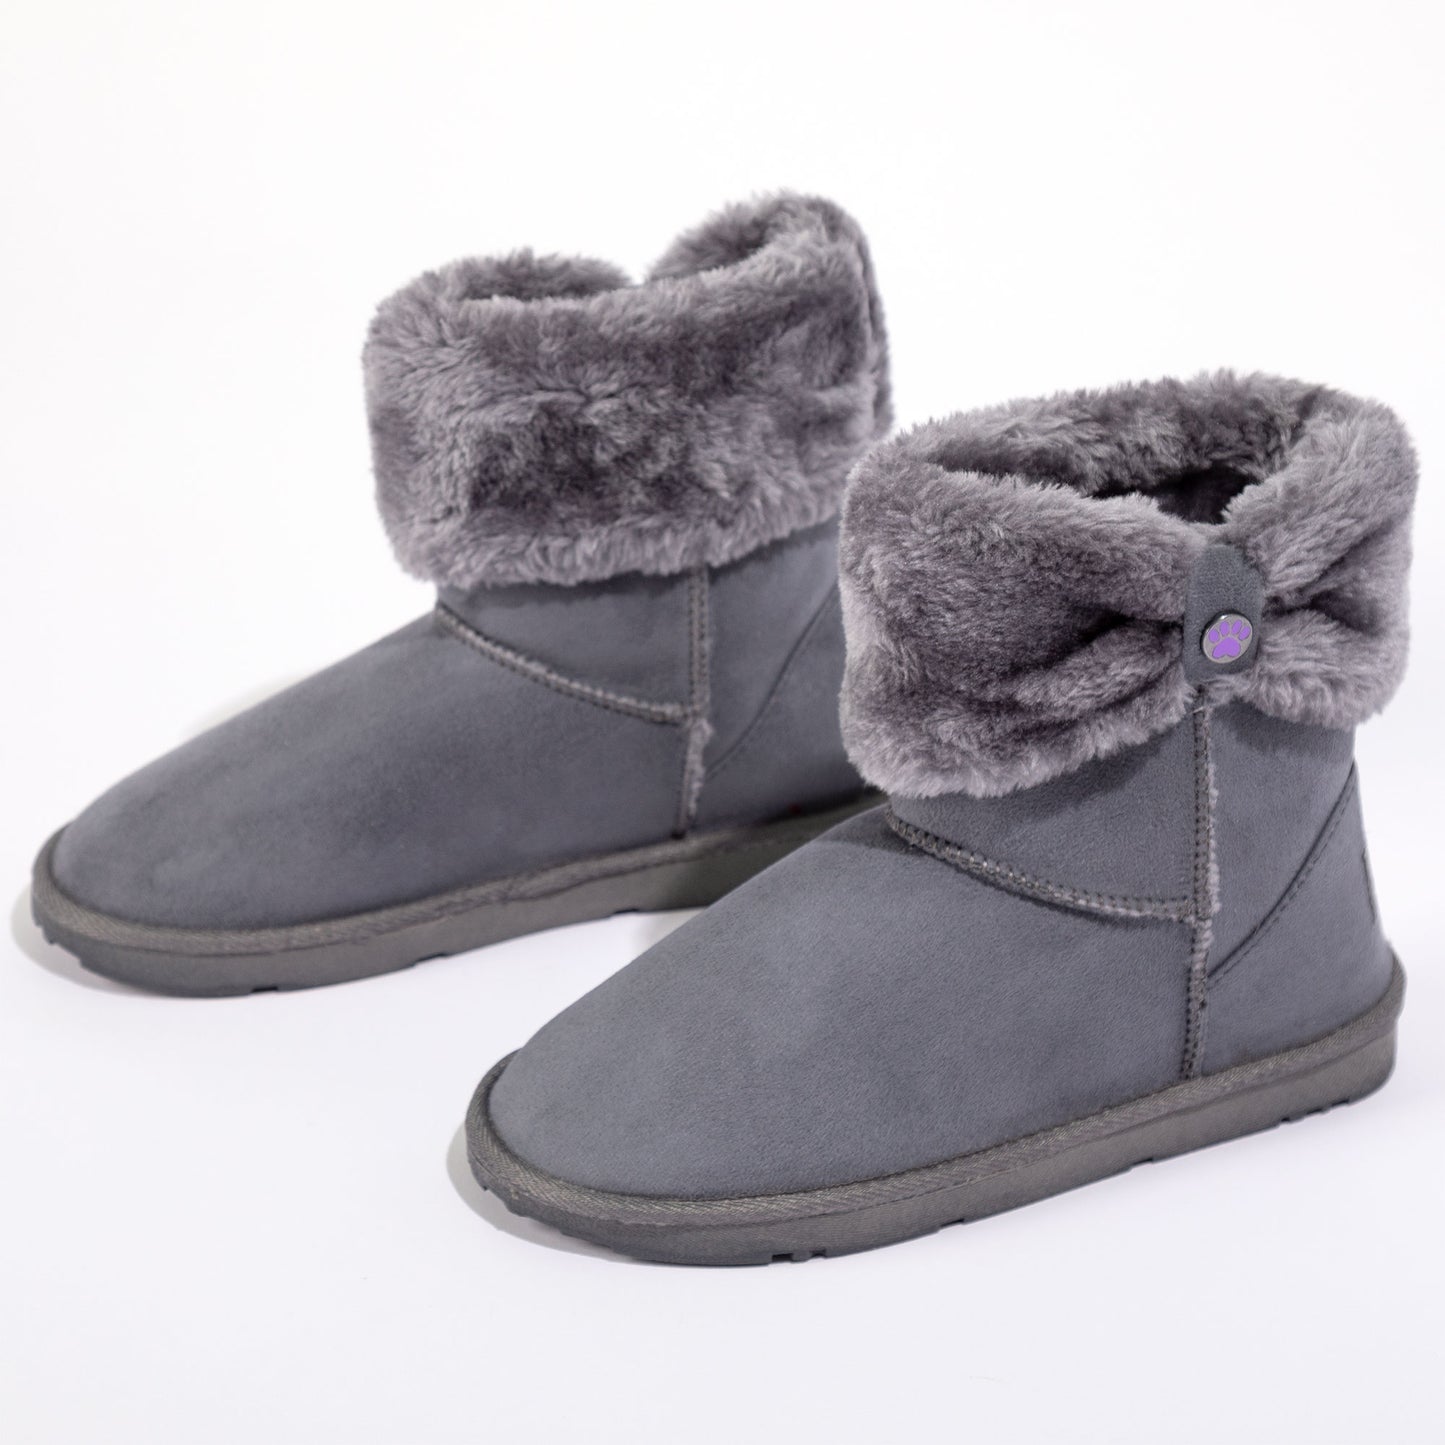 Plush Paw Print Slip-On Ankle Boots